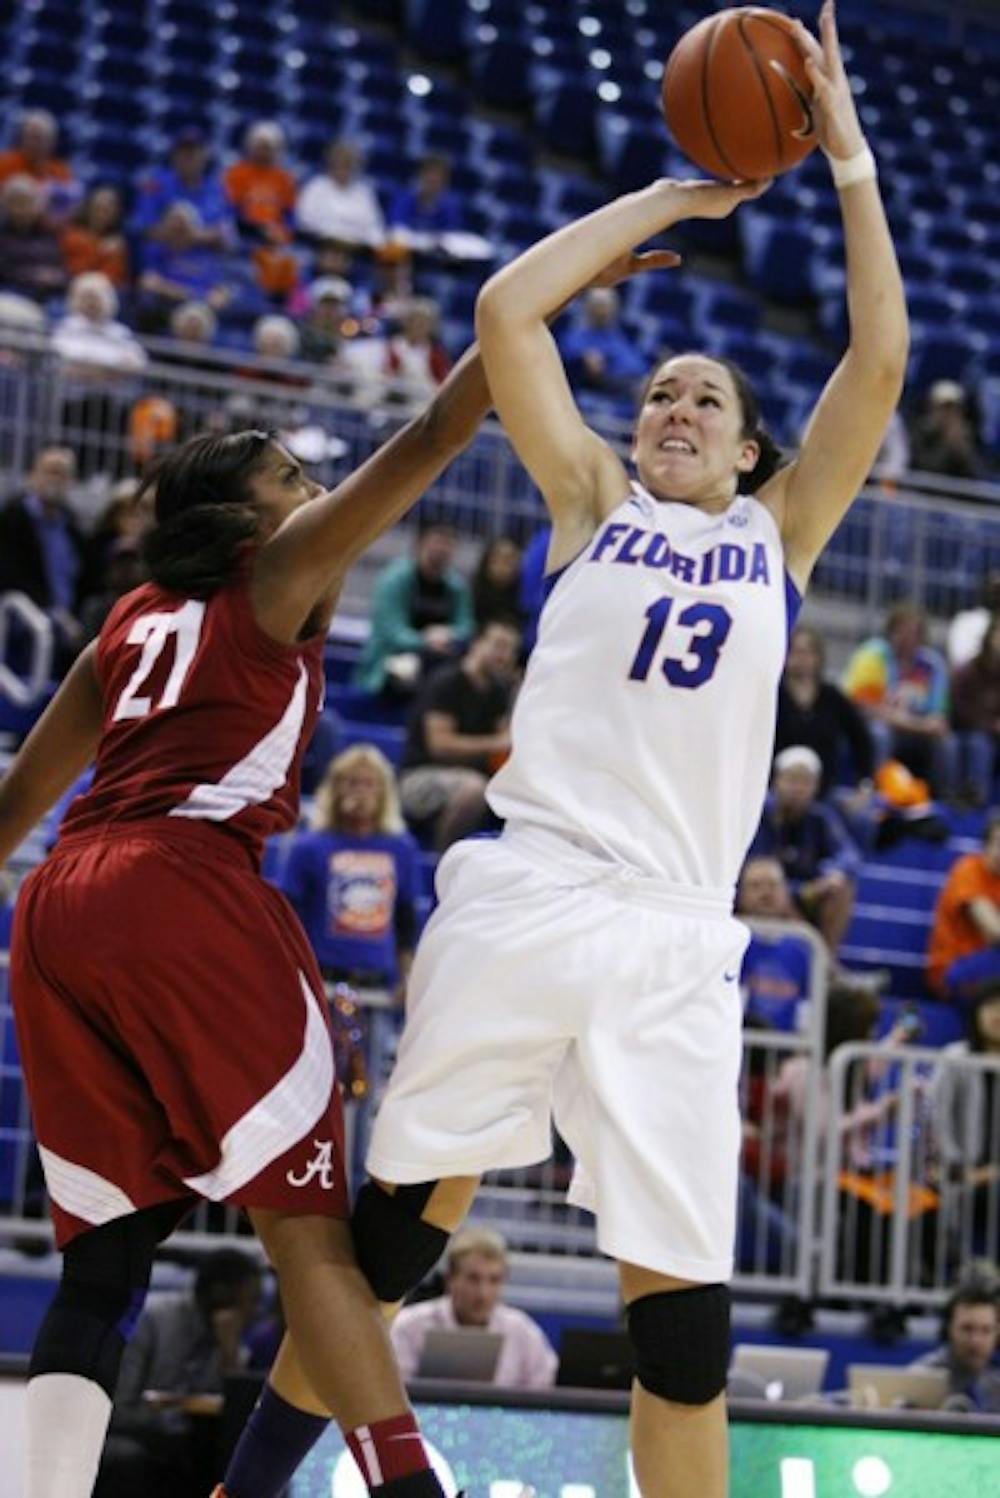 <p>Gators center Azania Stewart (13) scored eight points and grabbed 10 rebounds in Florida’s 61-37 win against Alabama on Thursday.</p>